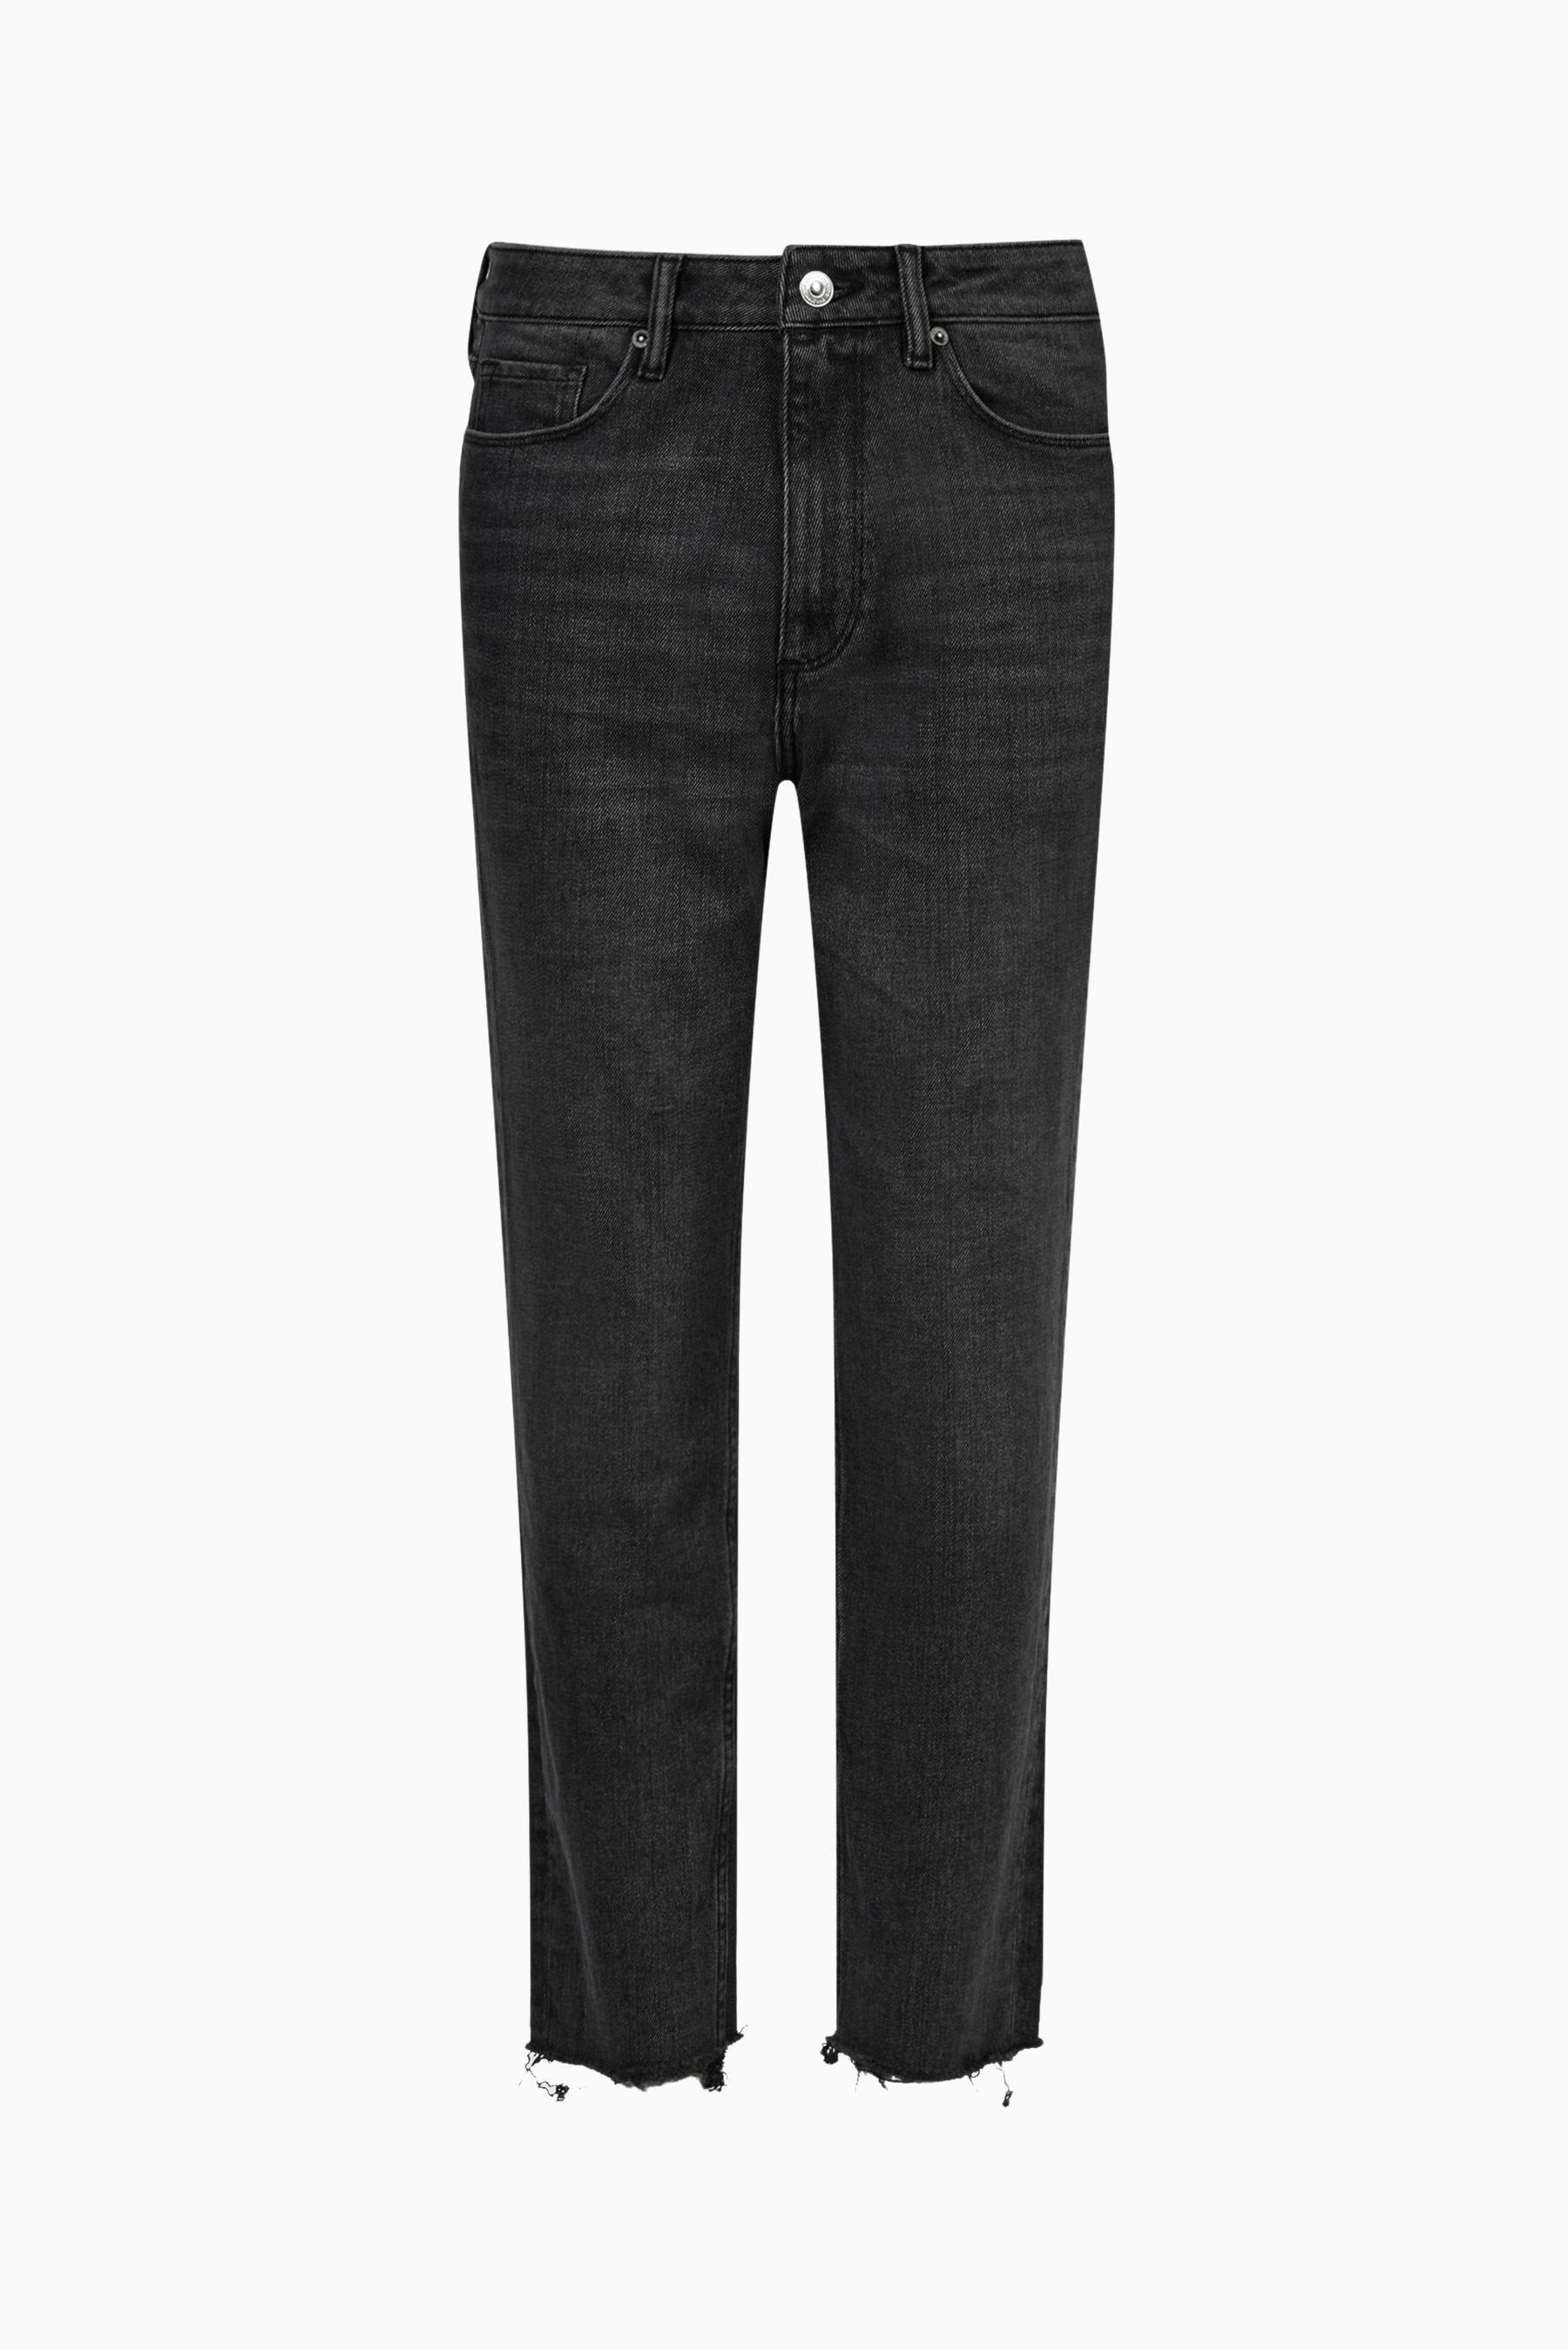 Buy All Saints Rali Black Jeans from the Next UK online shop